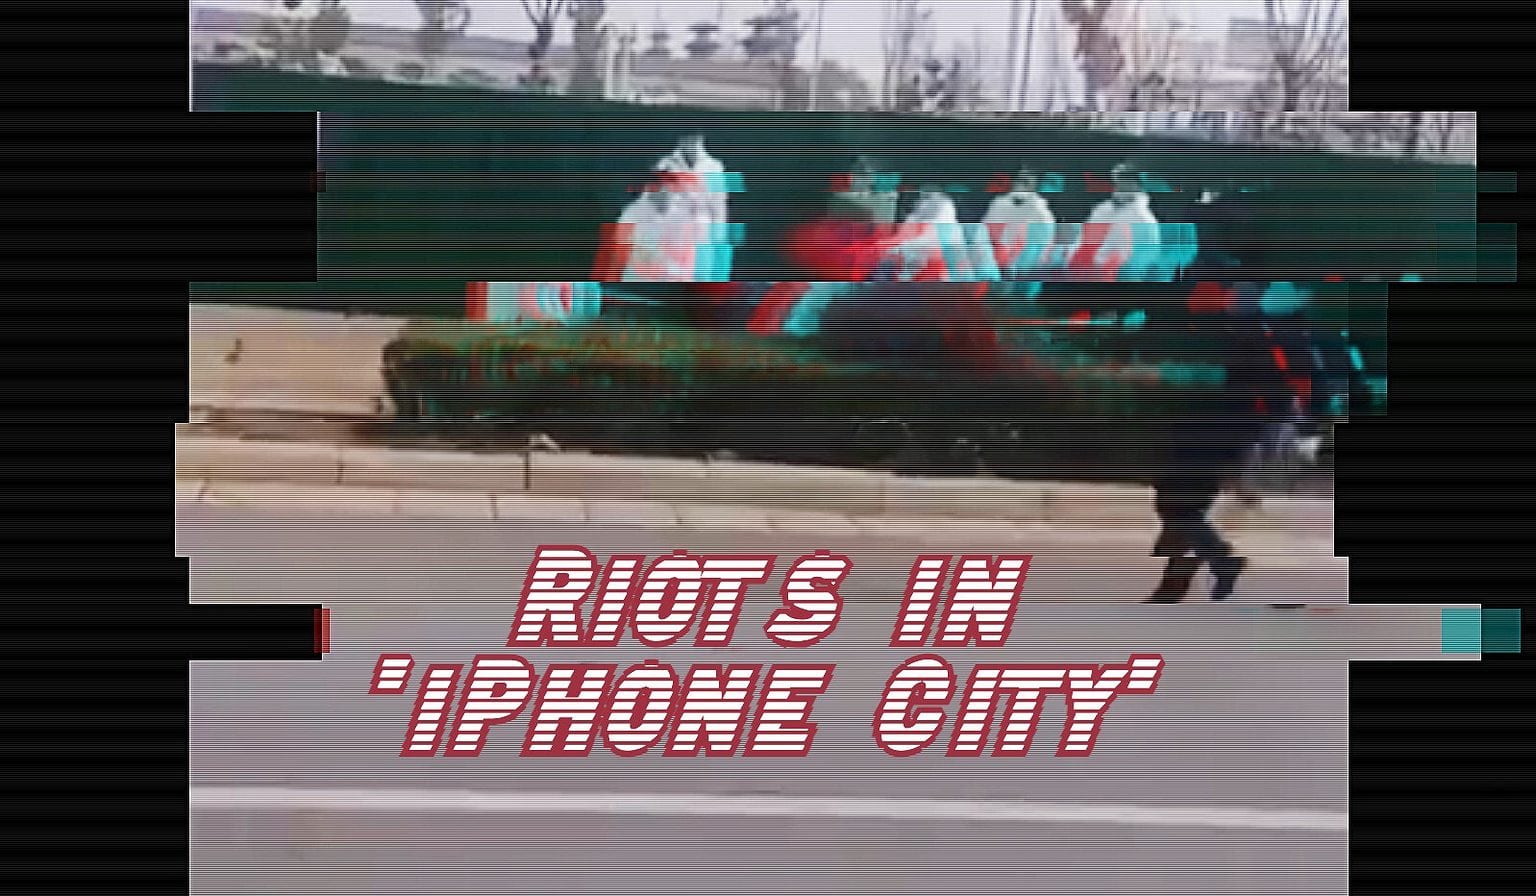 Protesters and police clashed Tuesday and Wednesday at Foxconn's plant in Zhengzhou, China